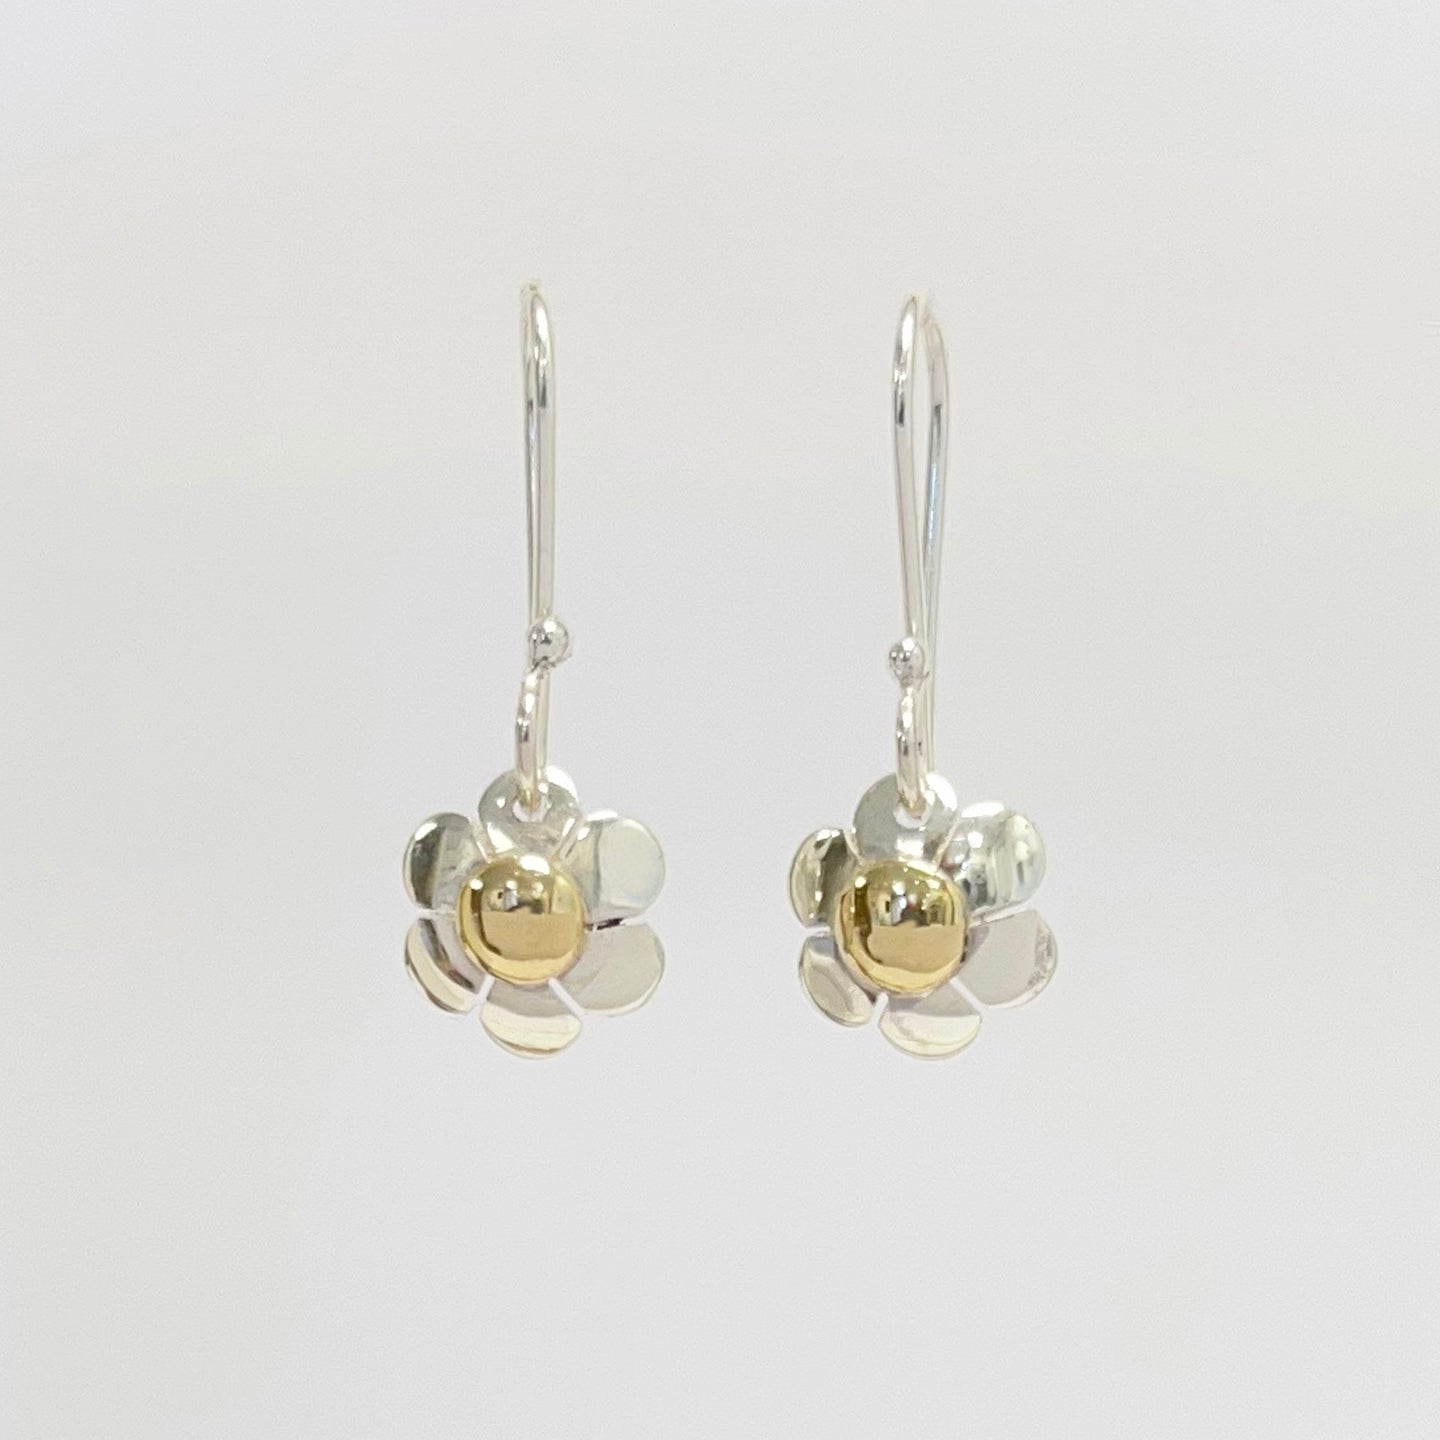 Silver and gold flower earrings - drop